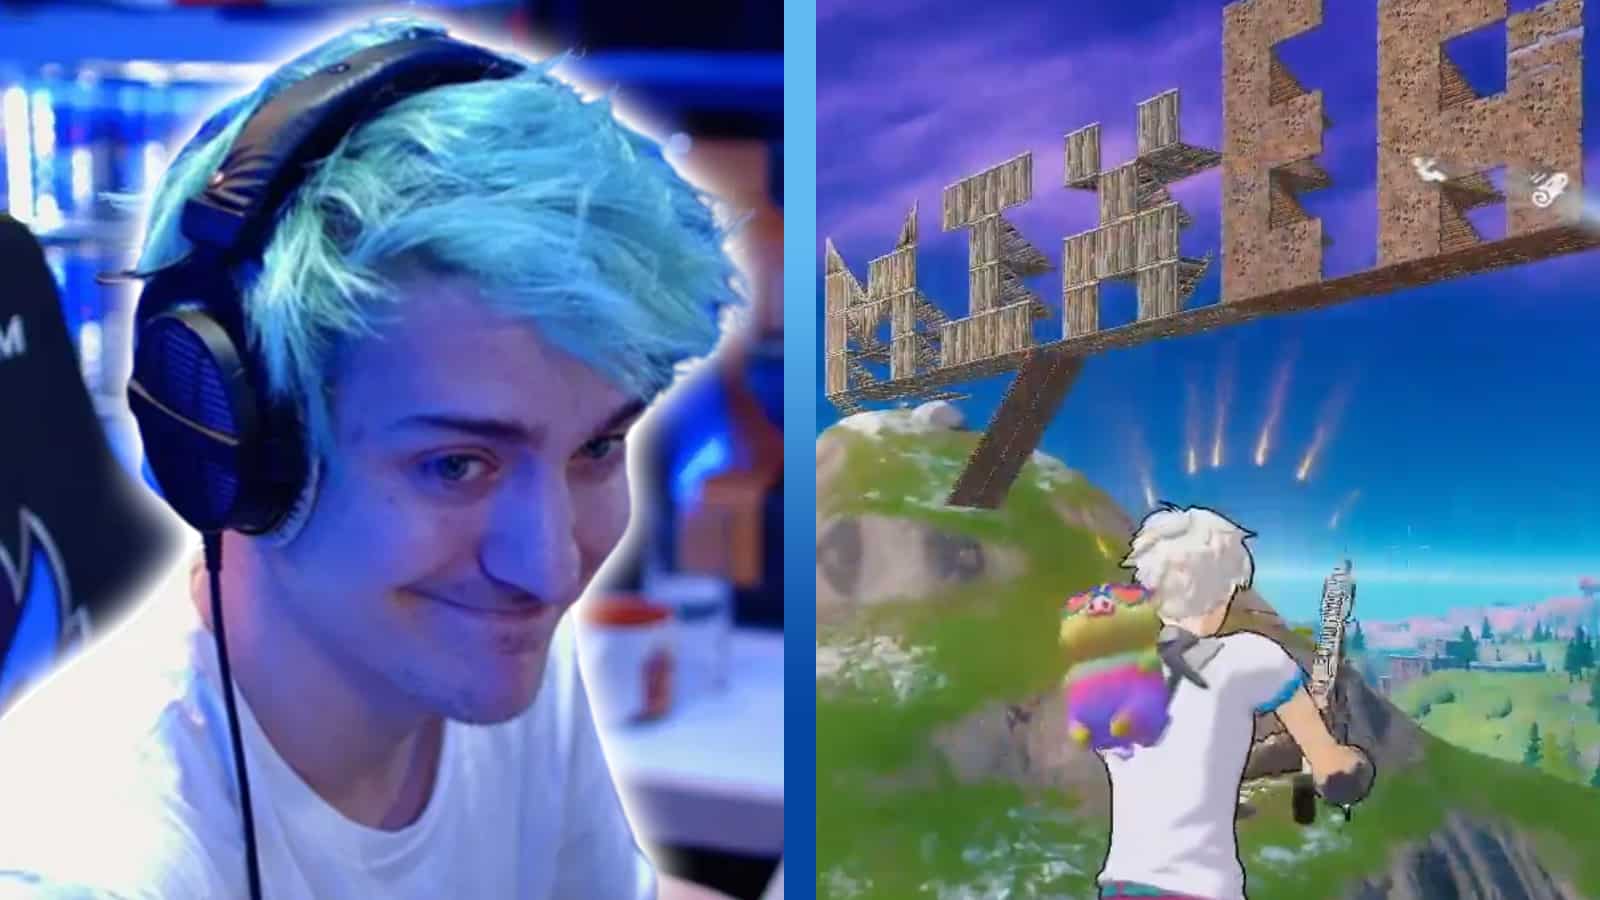 Ninja has perfect response after Fortnite stream sniper tries to embarrass him